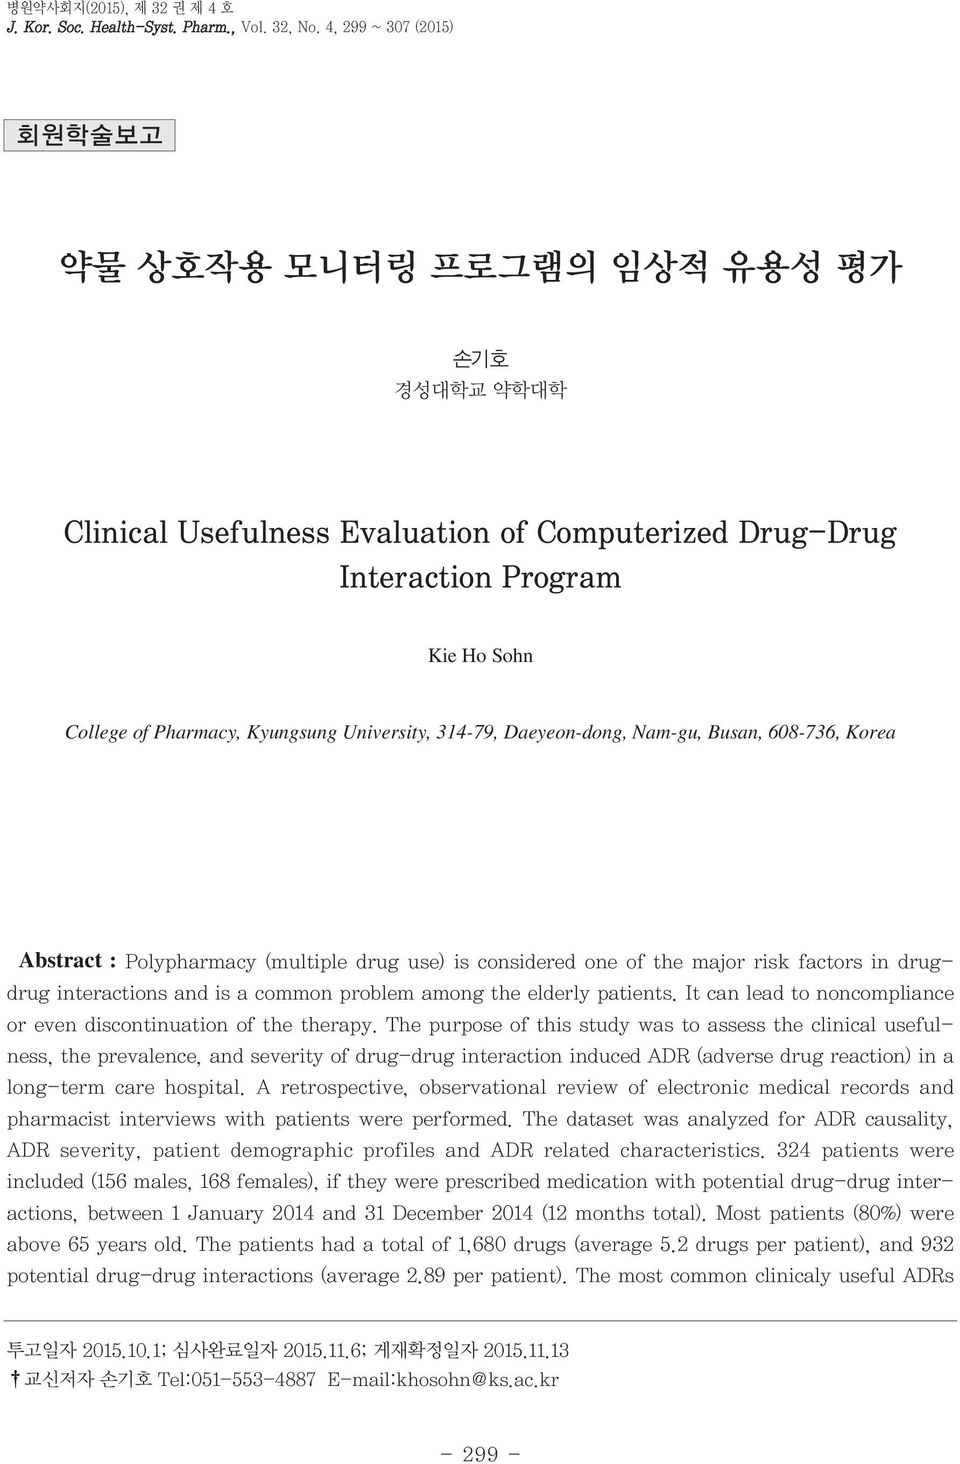 University, 314-79, Daeyeon-dong, Nam-gu, Busan, 608-736, Korea Abstract : Polypharmacy (multiple drug use) is considered one of the major risk factors in drugdrug interactions and is a common